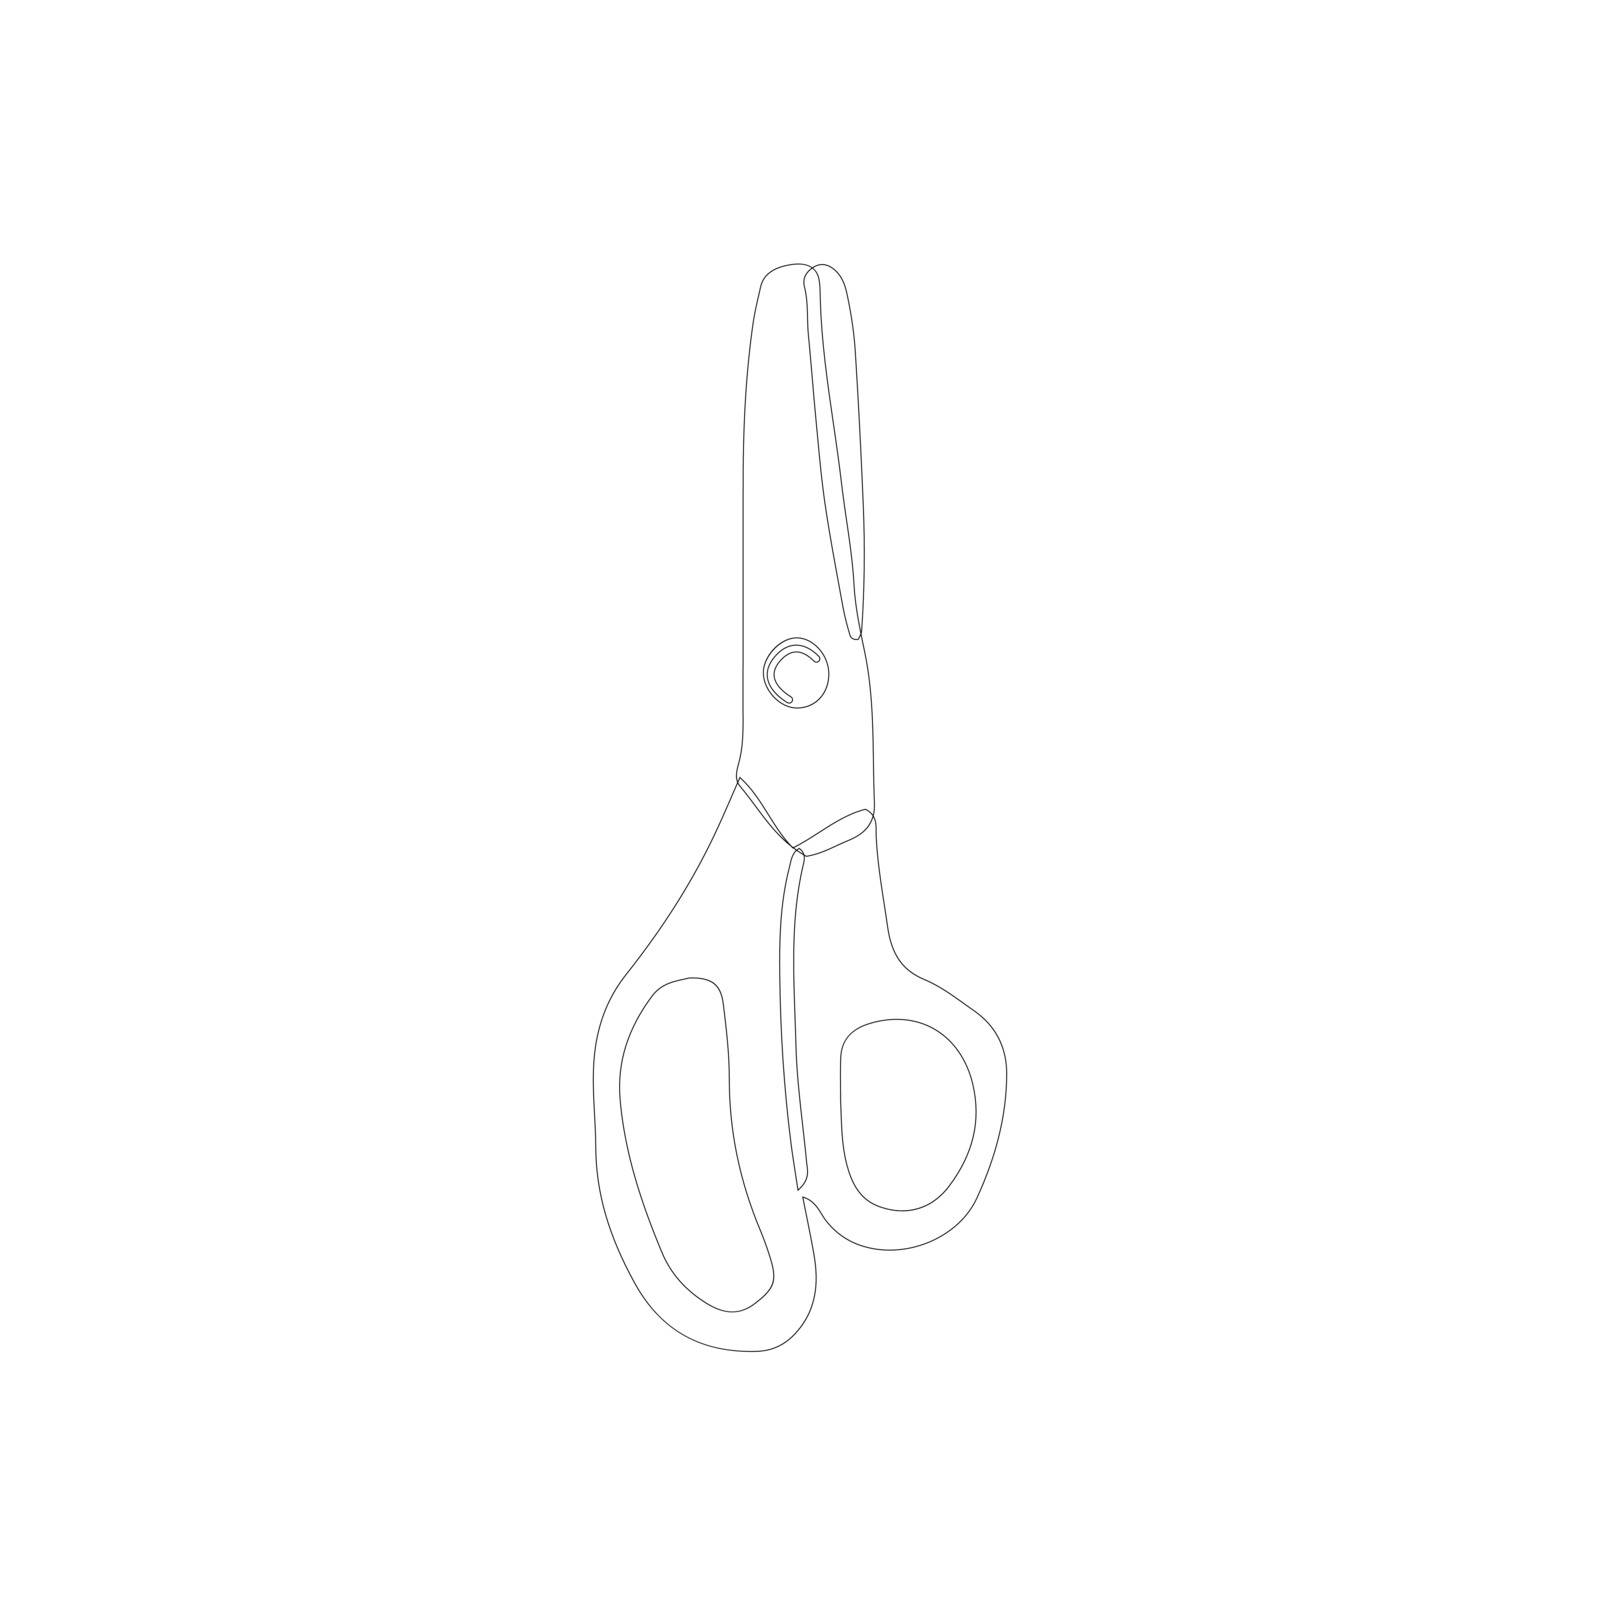 Scissors icon in outline style isolated on white background. by Nata_Prando